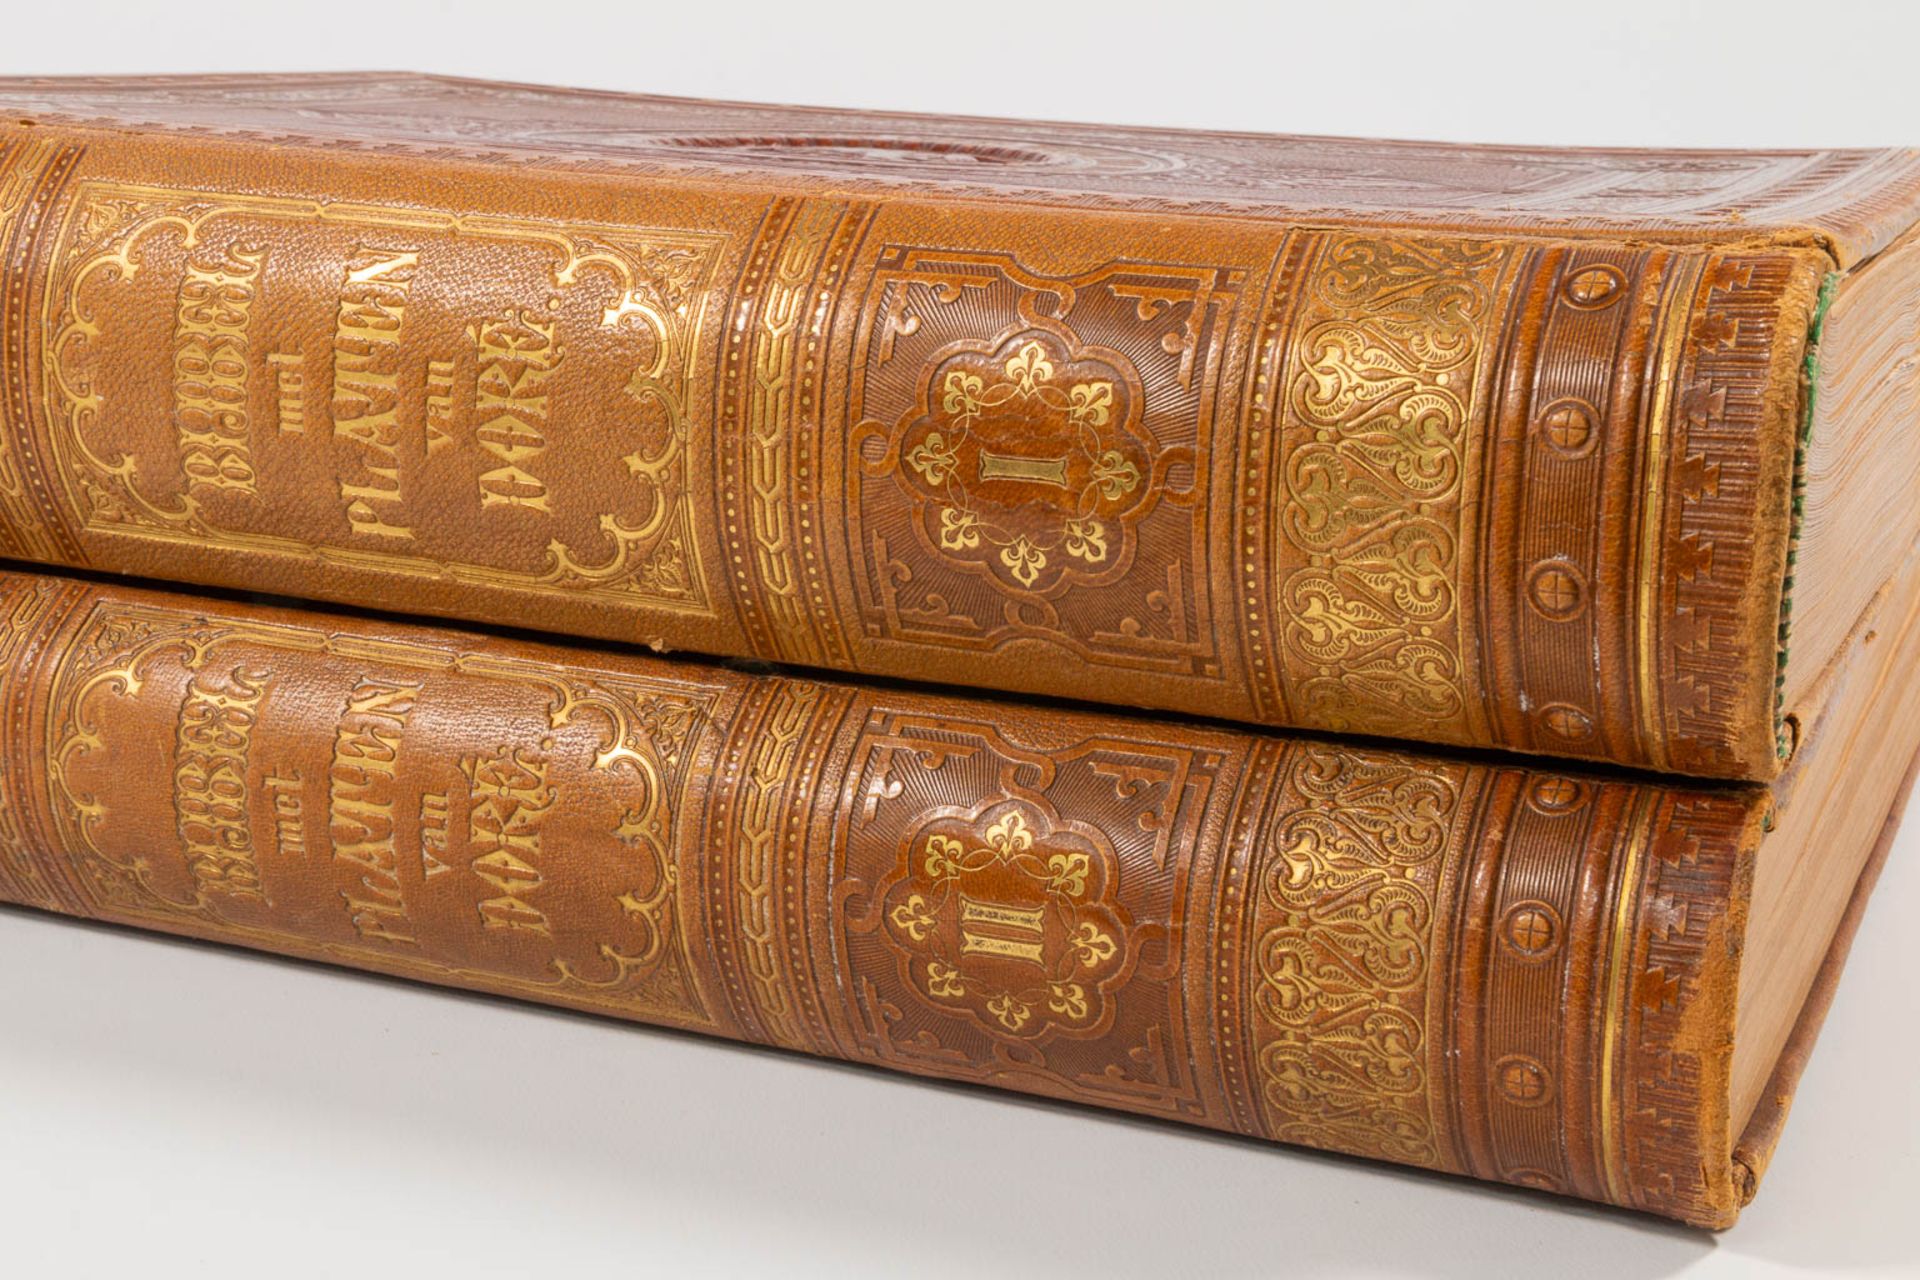 A pair of bibles 'The holy writing', the old and new testament, with 200 images by Gustave Doré. - Image 8 of 15